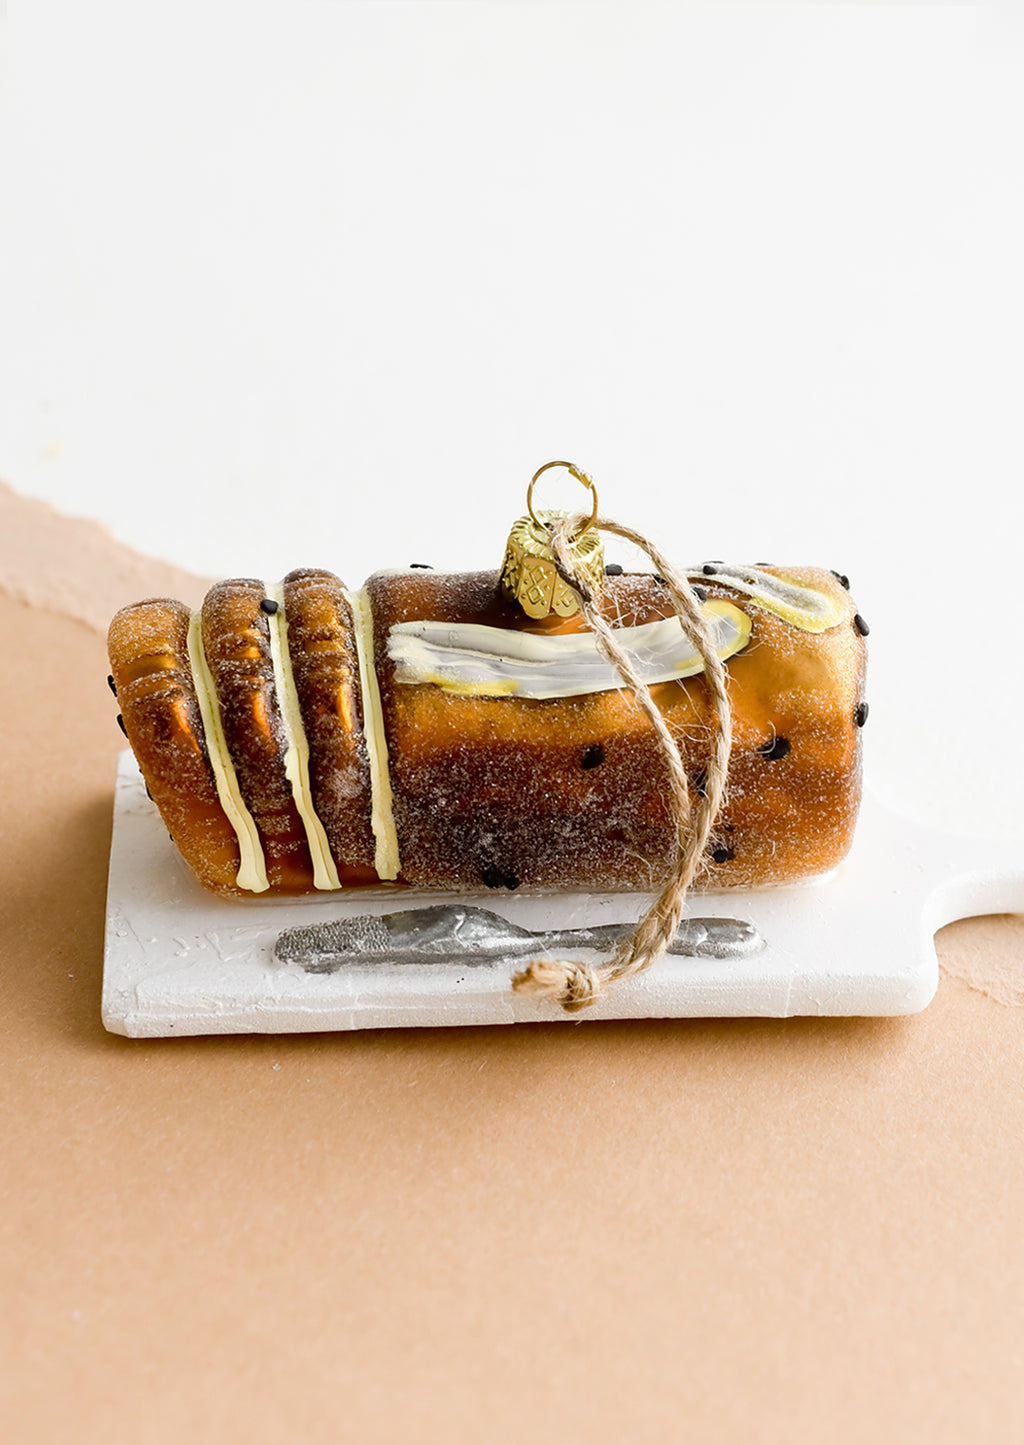 2: A decorative holiday ornament in shape of loaf of banana bread on platter.